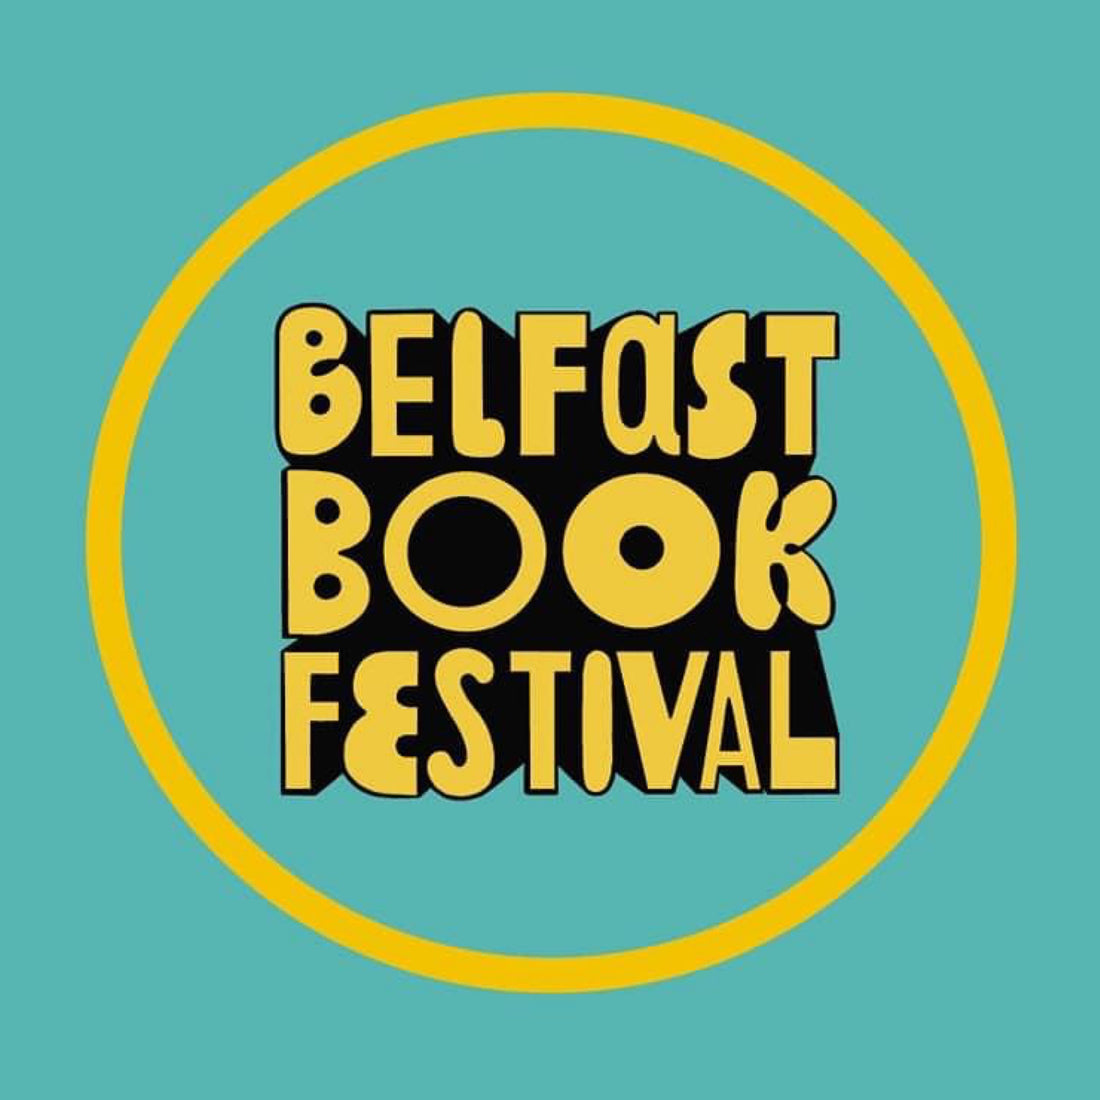 The 11th edition of the Belfast Book Festival